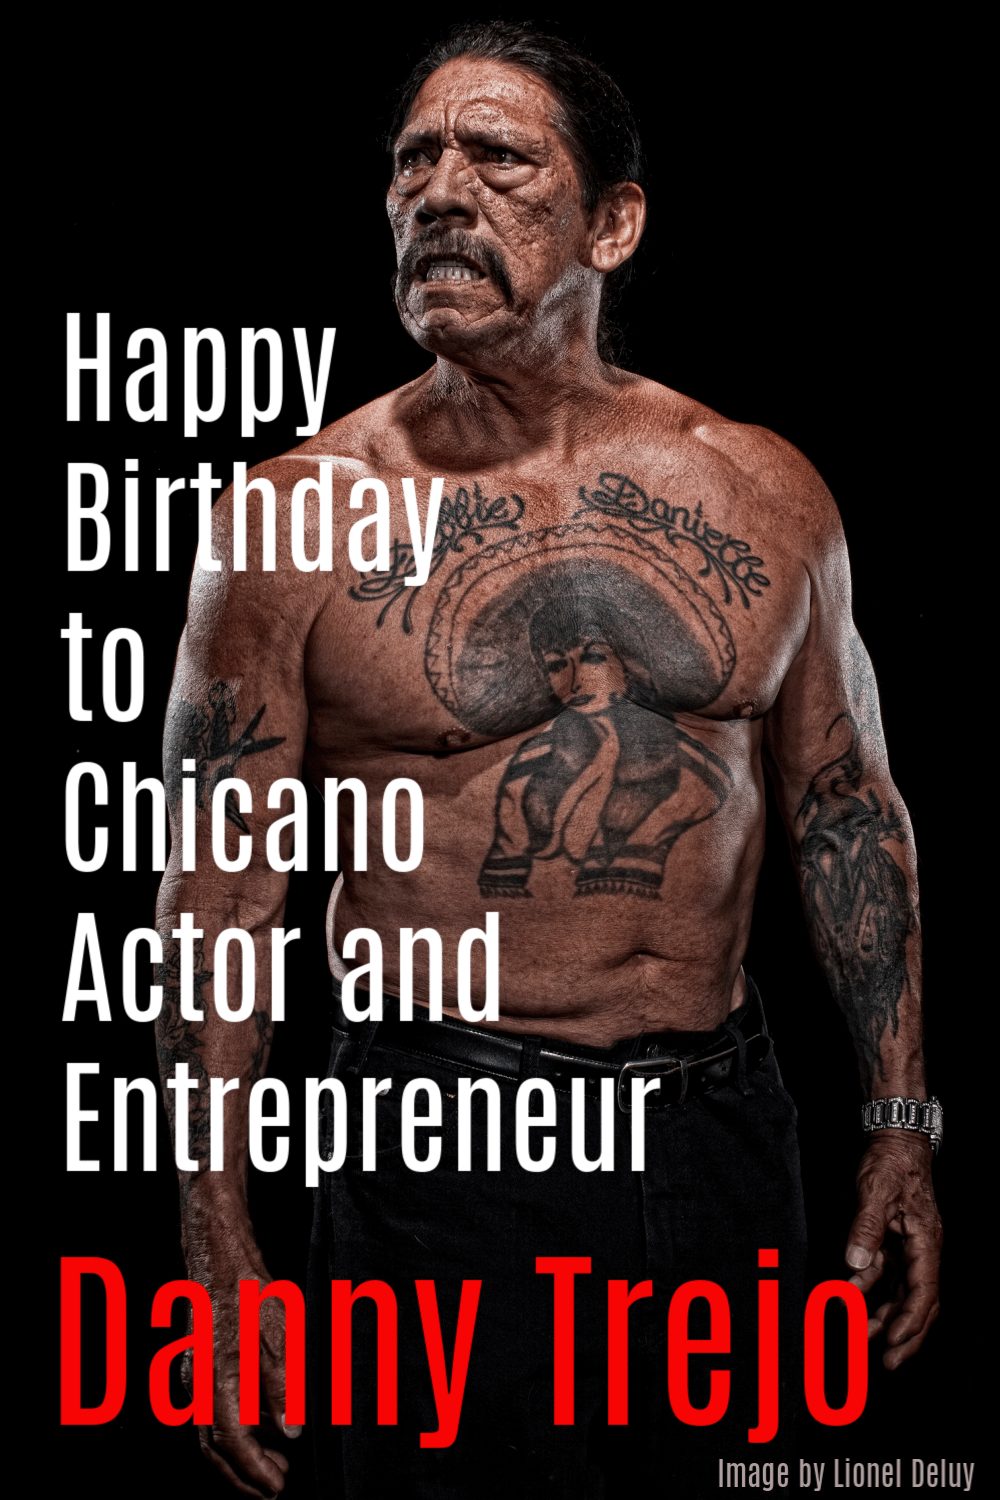 Happy Birthday to Chicano Actor and Entrepreneur Danny Trejo. Image by Lionel Deluy on Craftychica.com